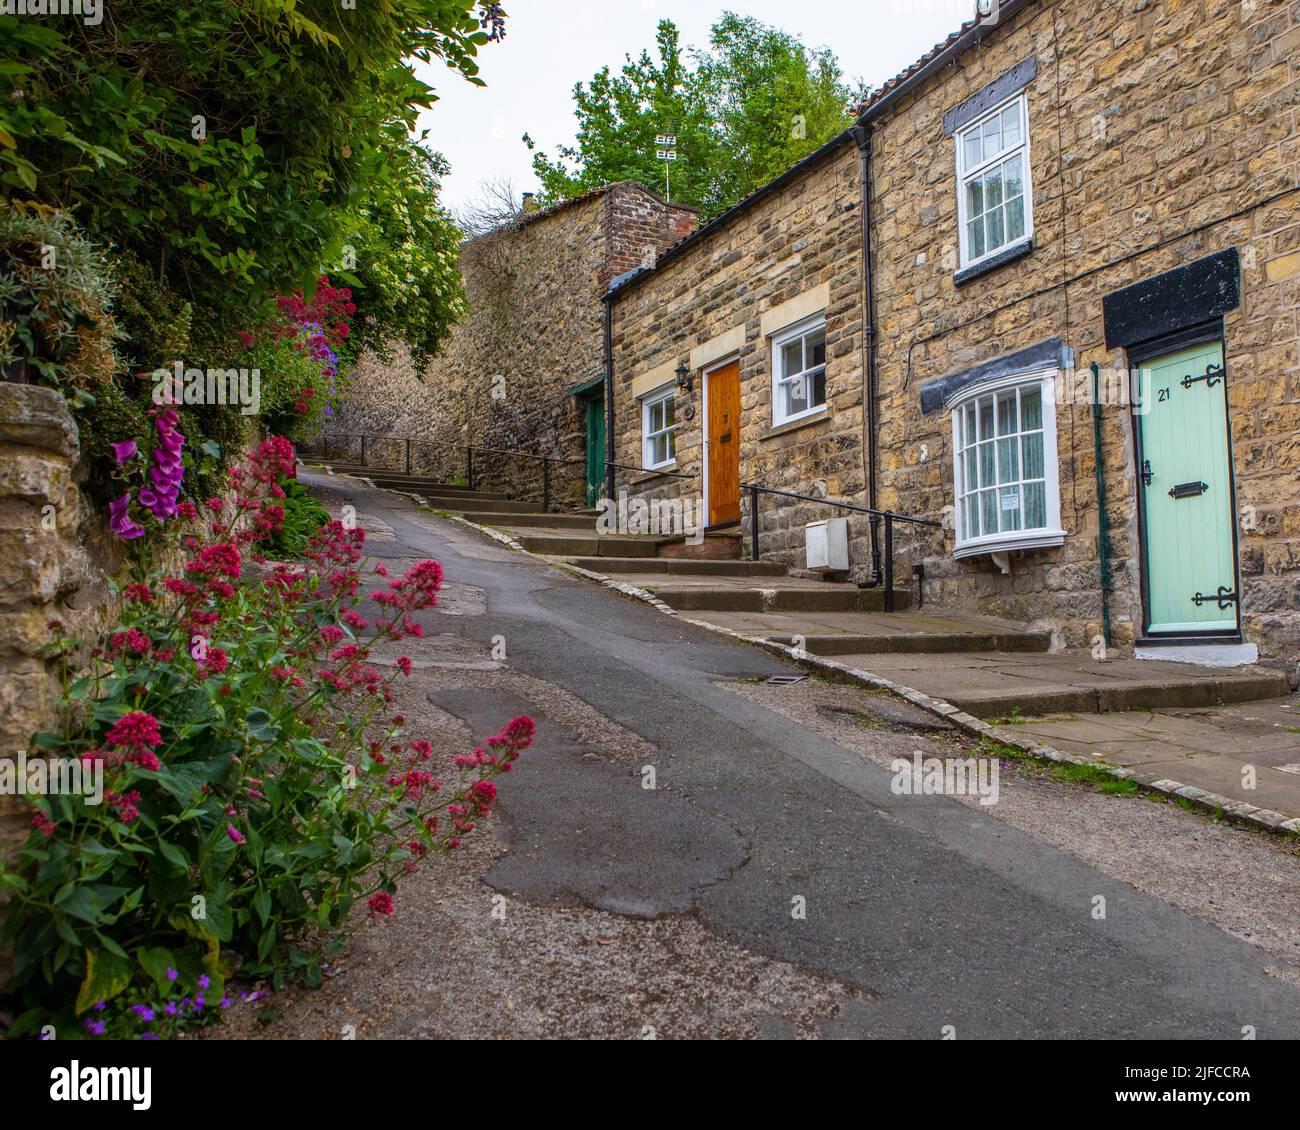 Pickering, UK - June 9th 2022: View of a street in the town of Pickering in North Yorkshire, UK. Stock Photo